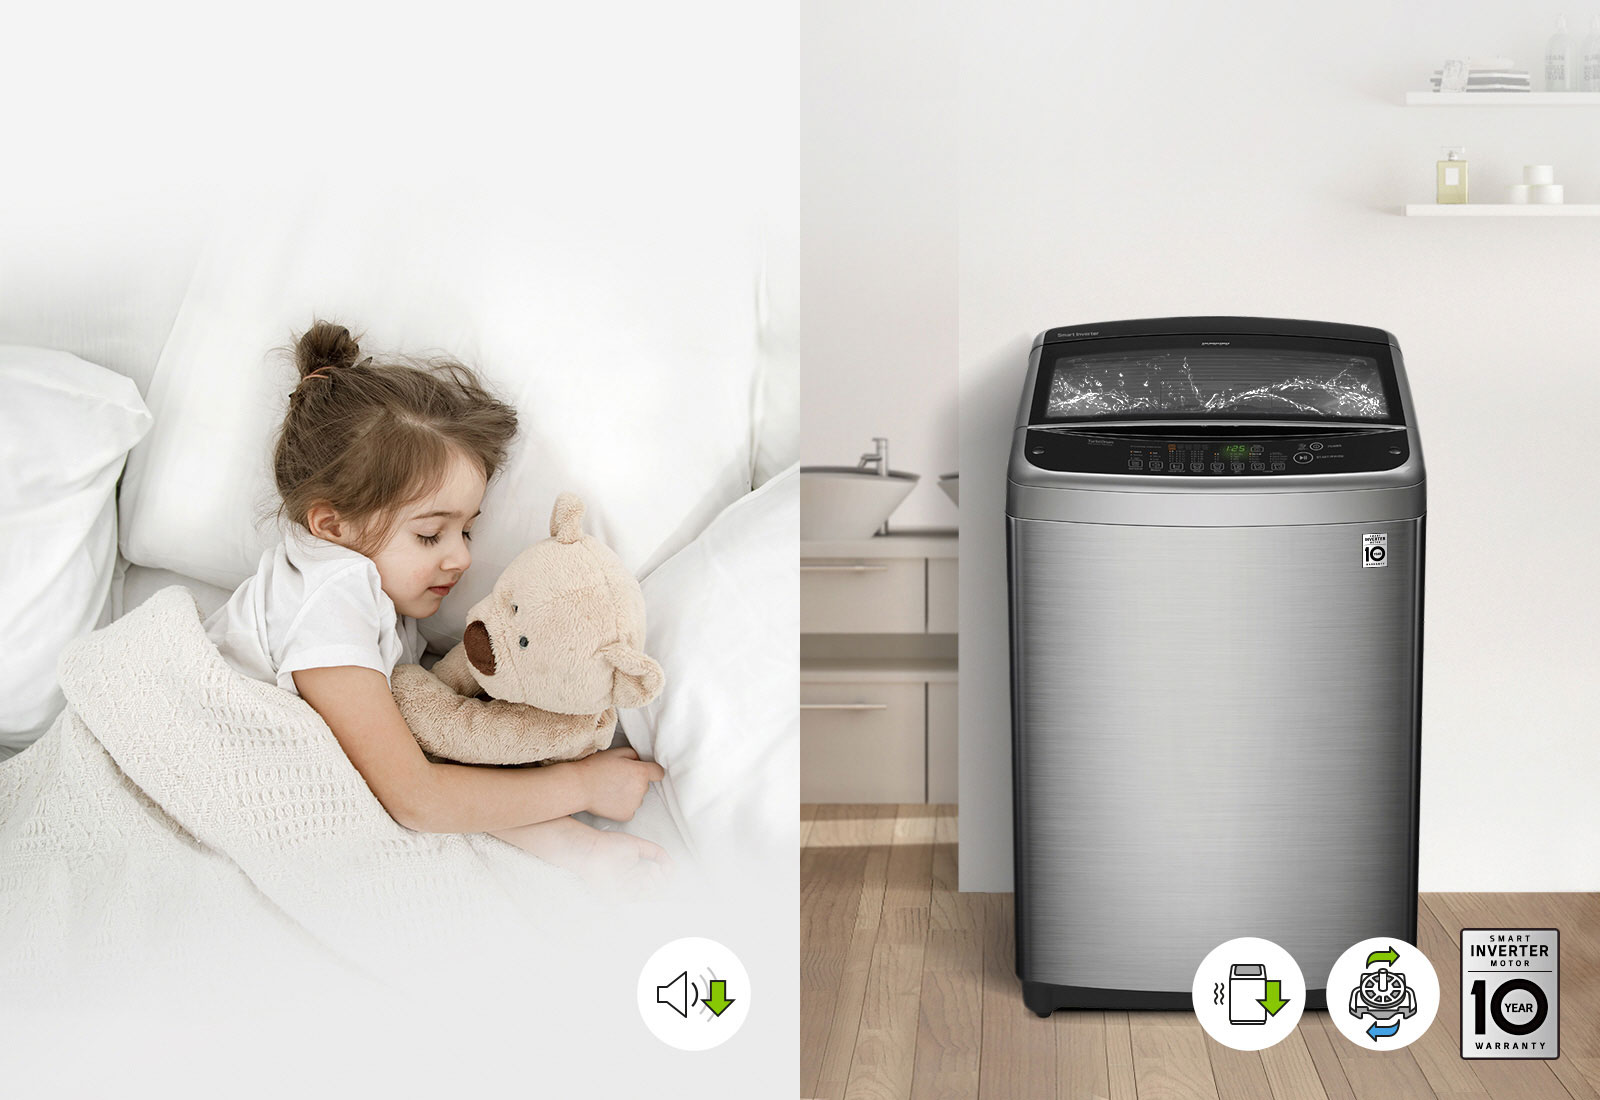 A child sleeps with a teddy bear on a bed in an image on the left with a volume icon next to an arrow down to indicate it is quiet. The front of the Top Load Washing Machine is shown on the right with three icons beneath it. The first icon is a washer and squiggly lines to mean shaking and an arrow pointing down. The second icon is a motor with a green arrow above pointing right and a blue arrow below pointing left to show rotation. The third icon is the LG Smart Inverter Motor 10 Year Warranty image. 